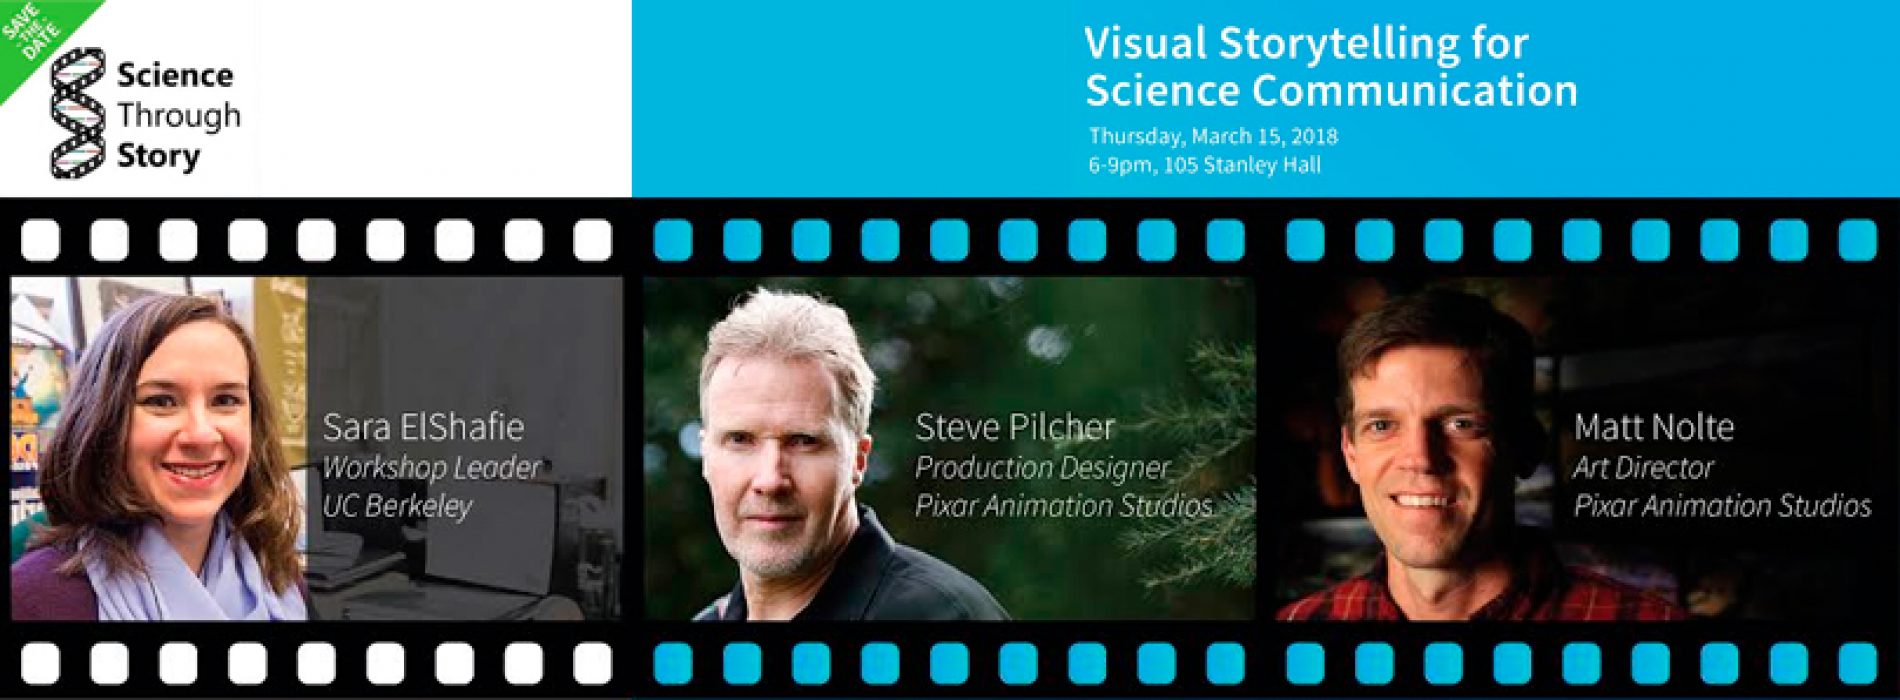 Save the Date: Visual Storytelling SciCom Workshop with PIXAR on March 15